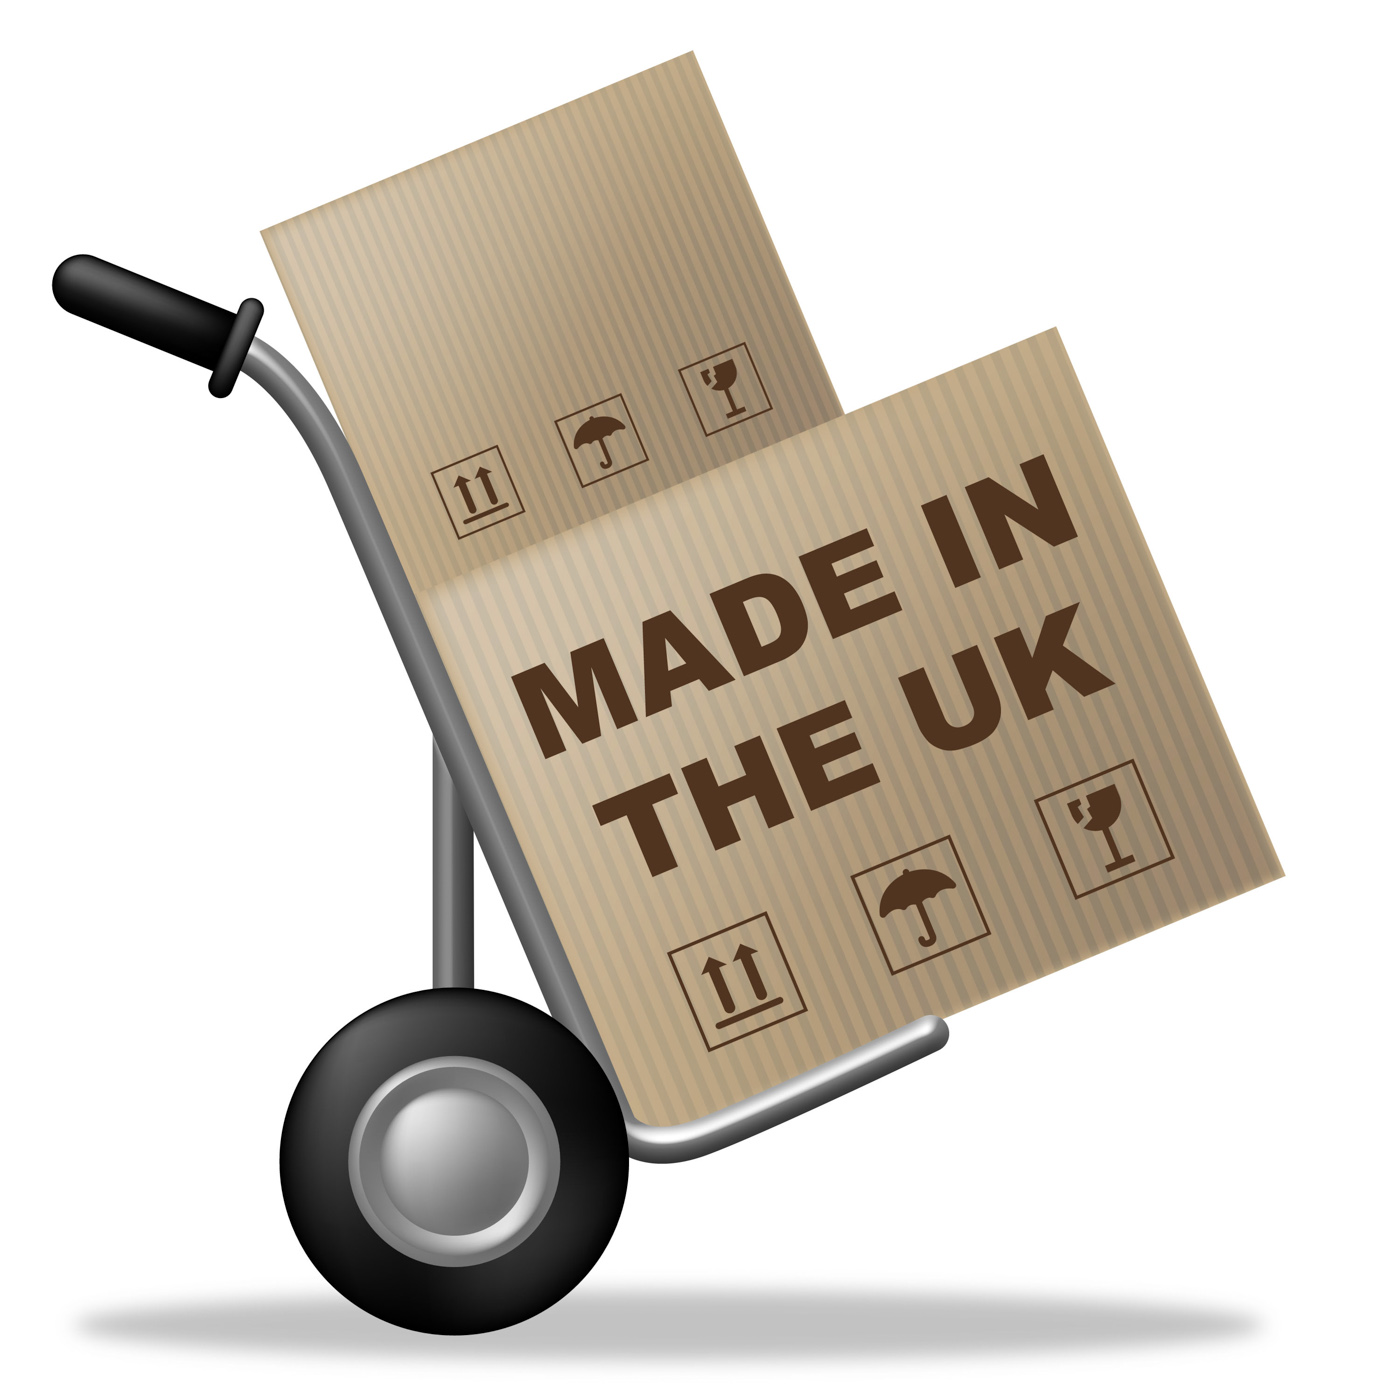 Made in uk represents united kingdom and britain photo